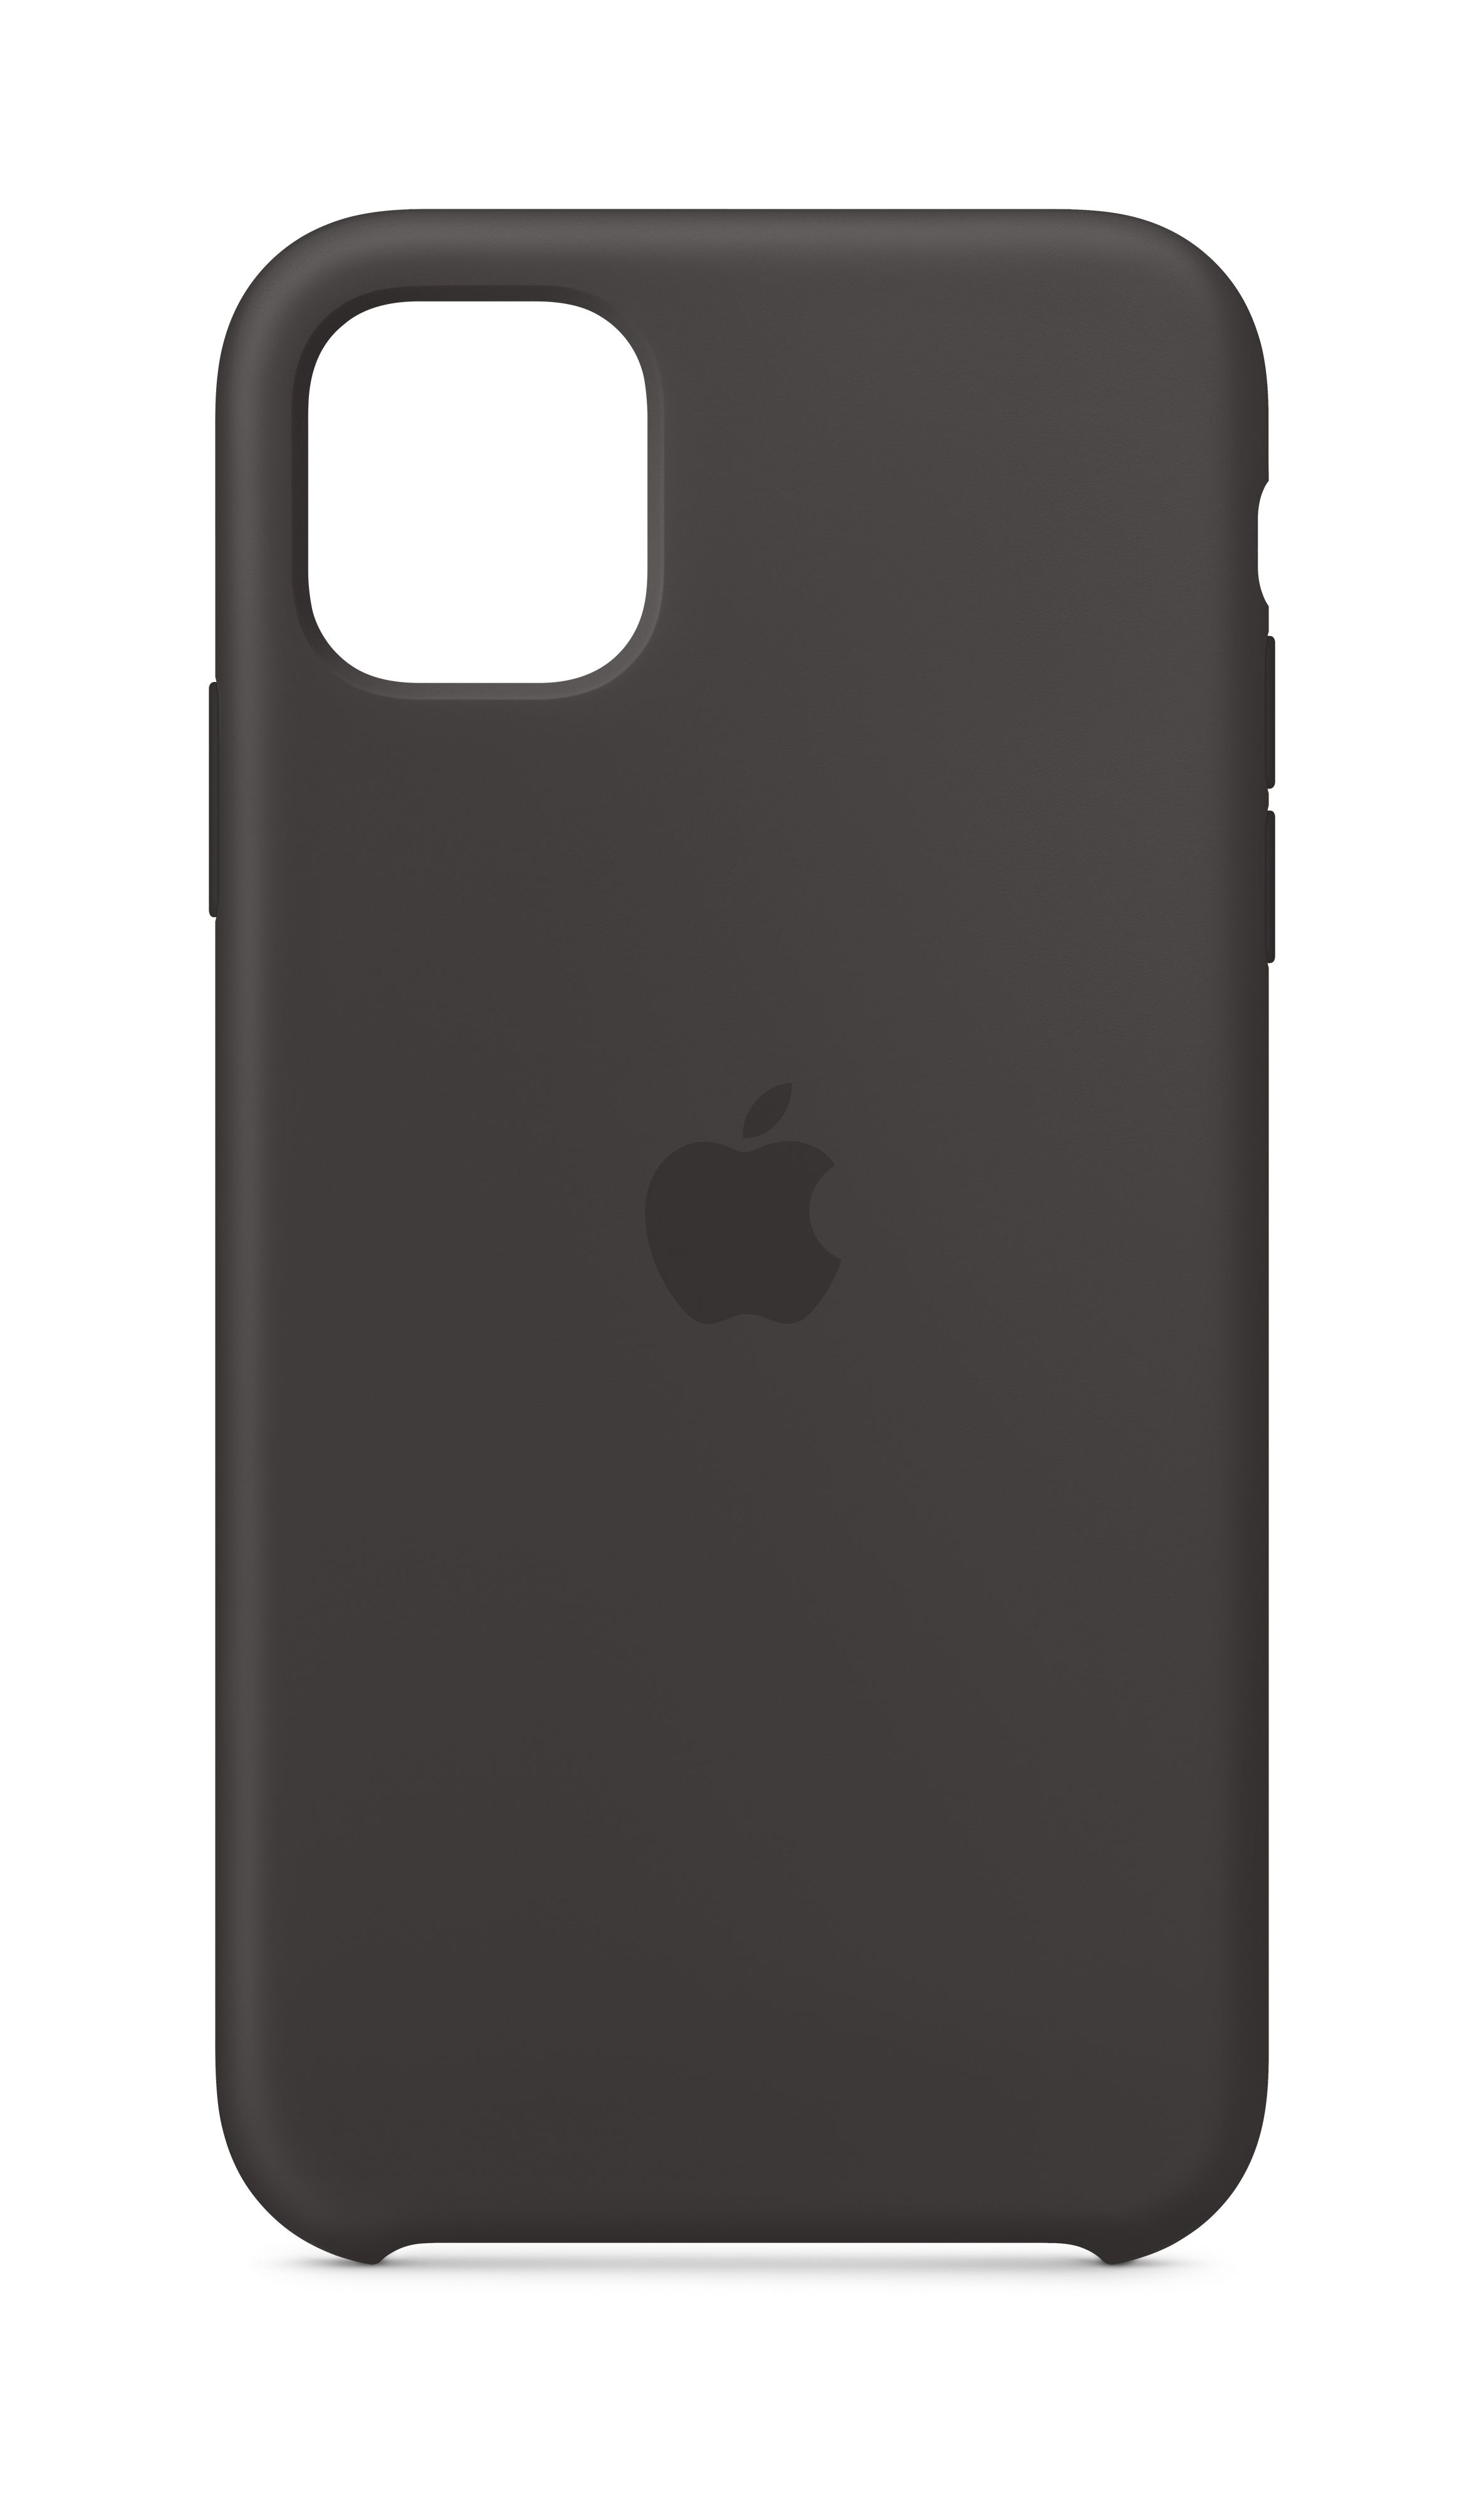 Apple Iphone 11 Silicone Case Black Incredible Connection